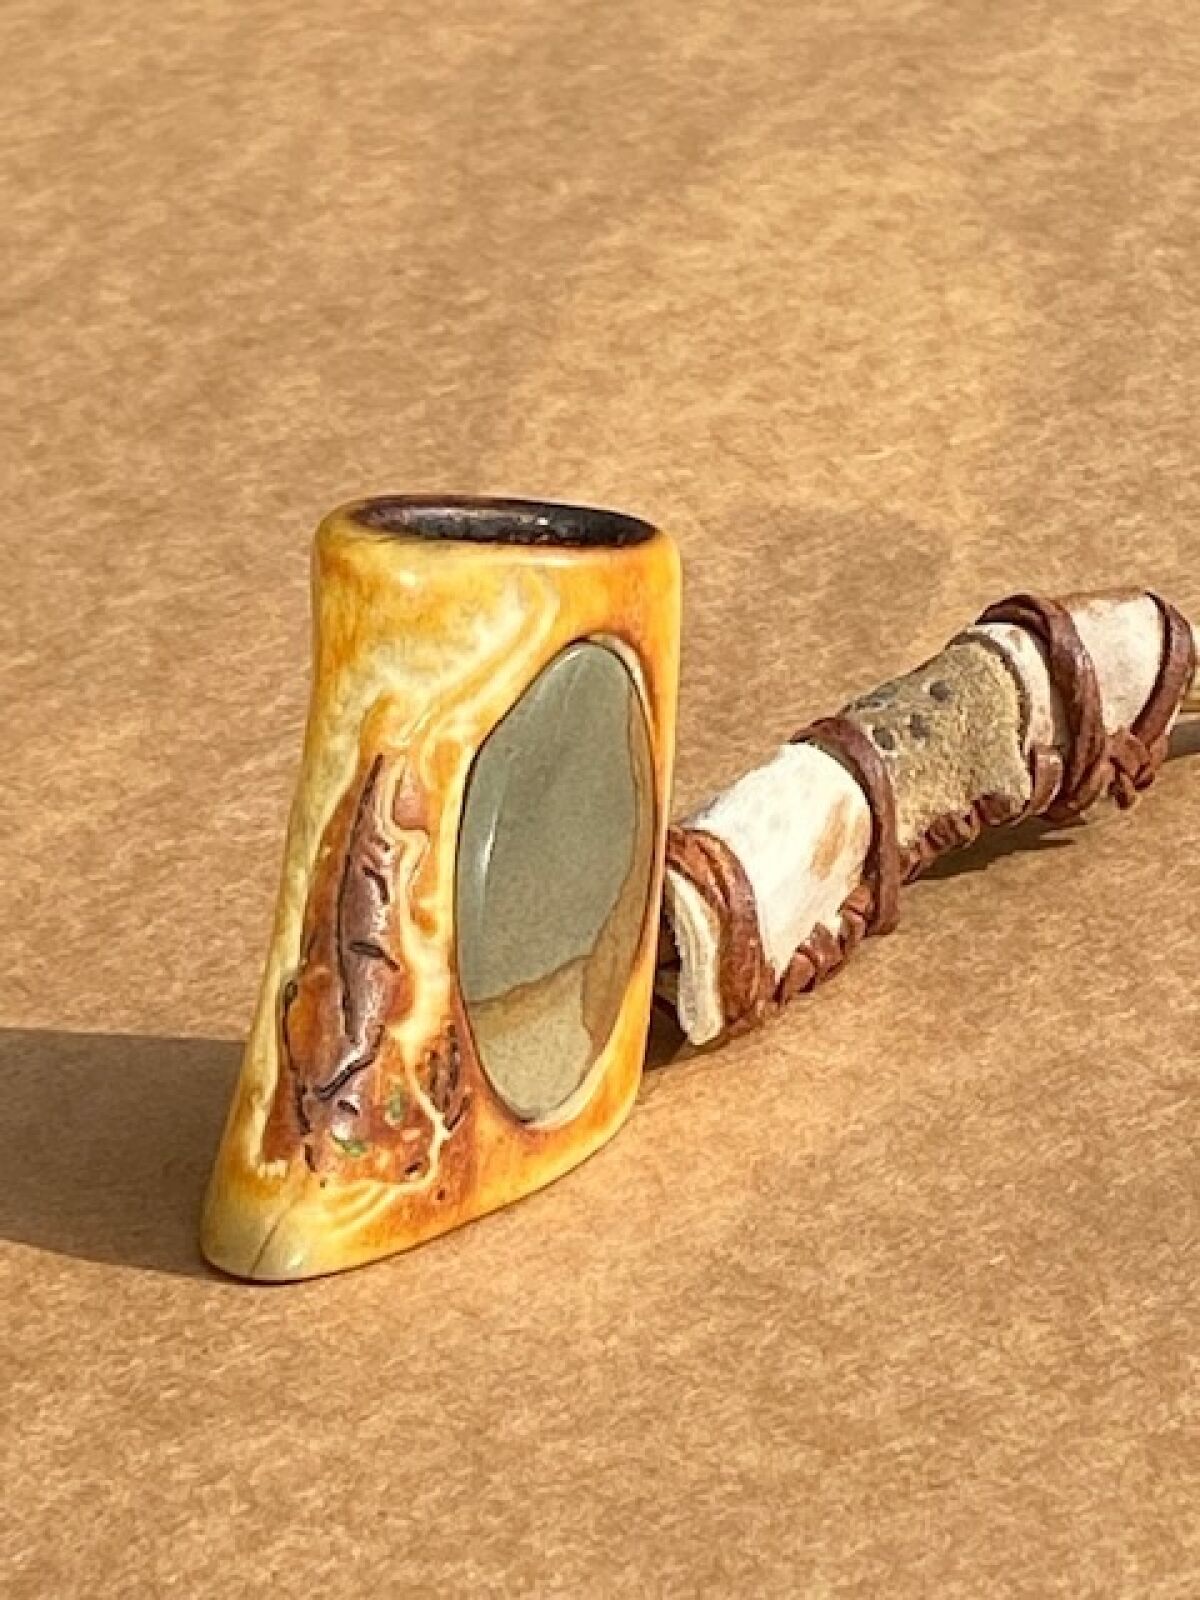 A pipe with a porthole window in its carved bowl.